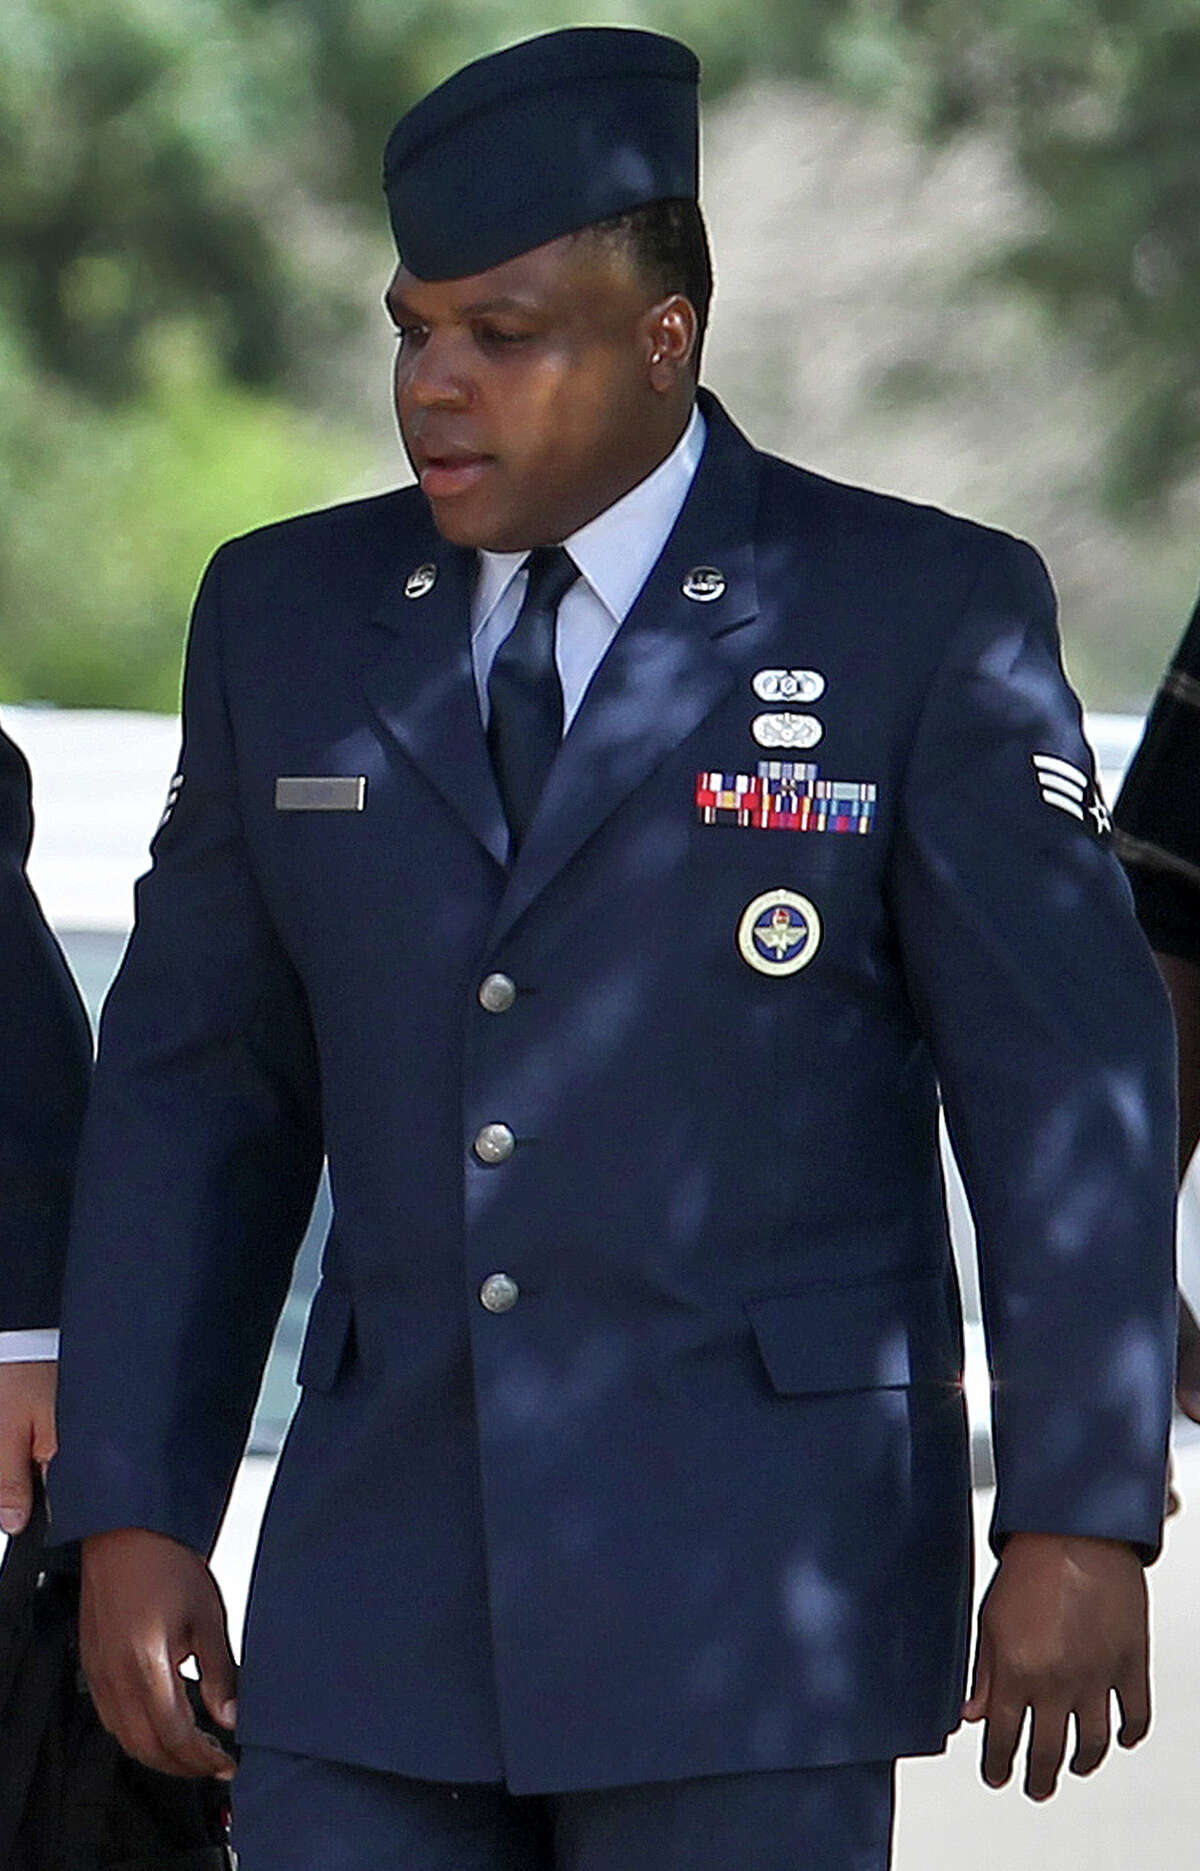 Senior Airman Christopher Oliver walks Monday June 24, 2013 at Joint Base San Antonio-Lackland. Oliver is facing a court-martial on charges of aggravated sexual assault and abusive sexual conduct of one basic training recruit and other charges.